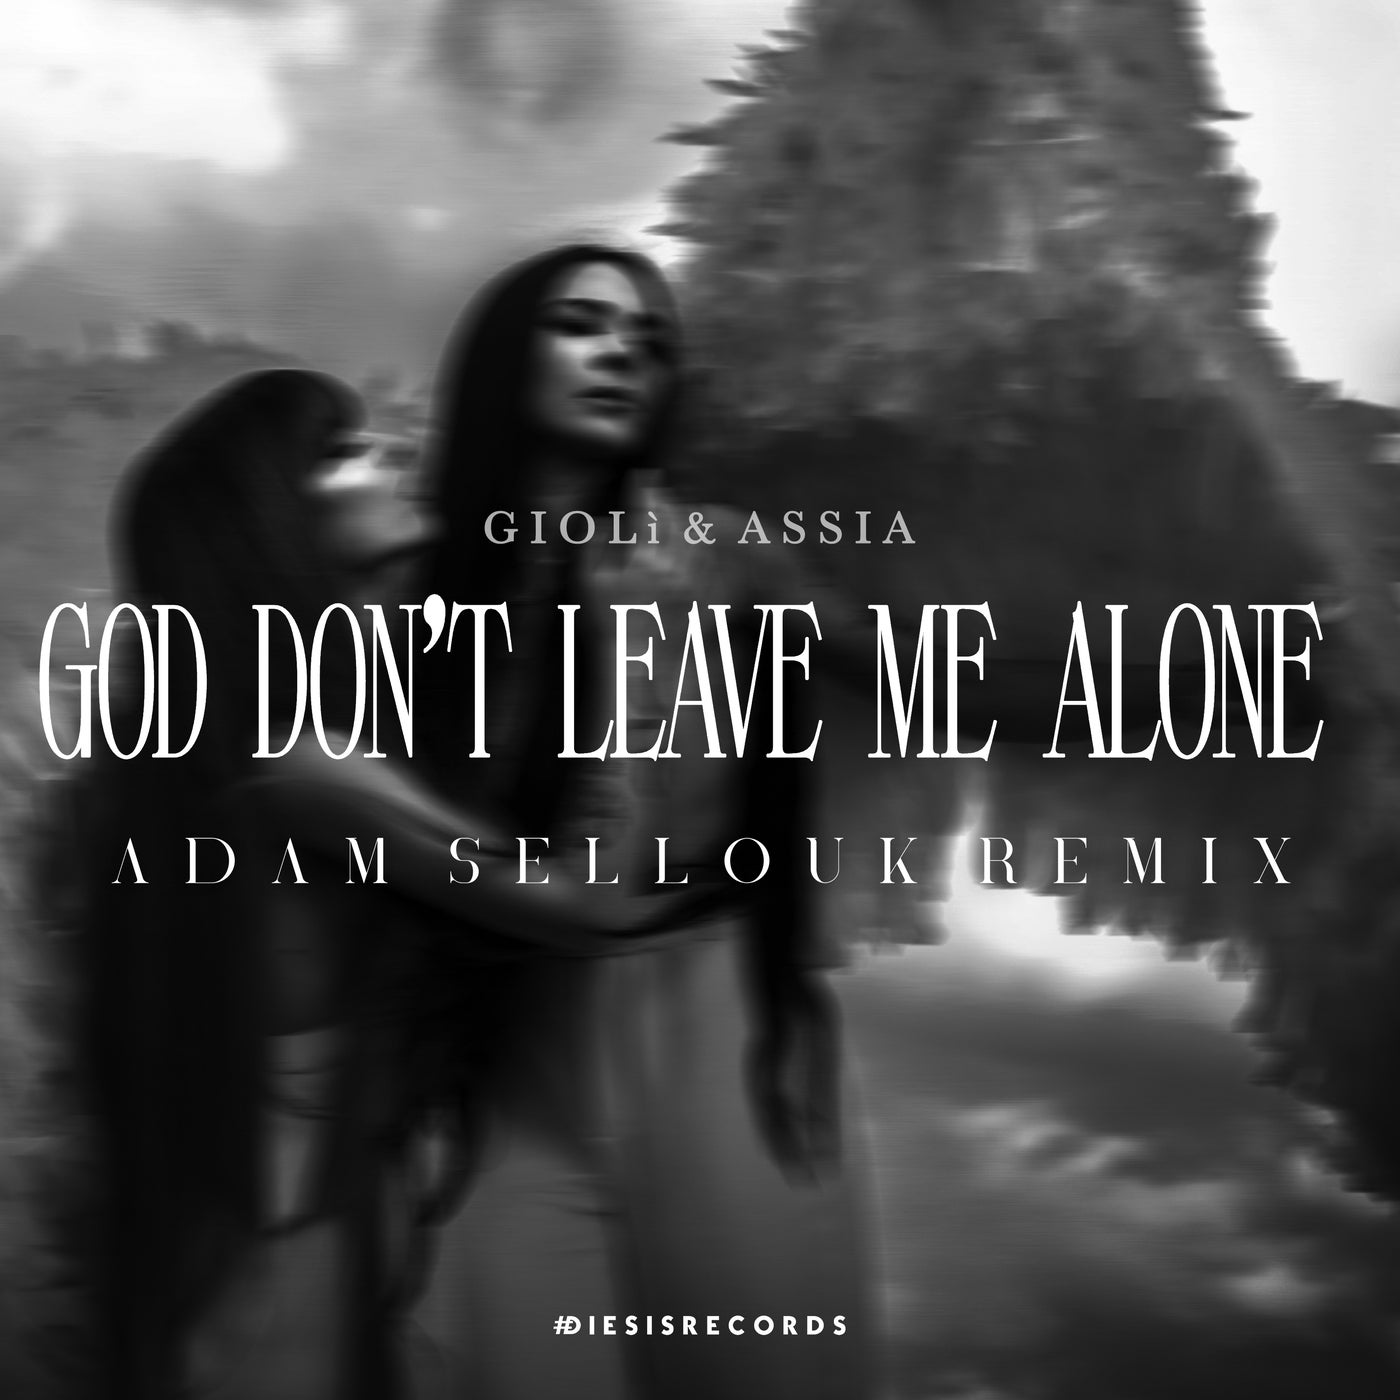 image cover: Gioli & Assia - God Don't Leave Me Alone (Adam Sellouk Remix) on Diesis Records